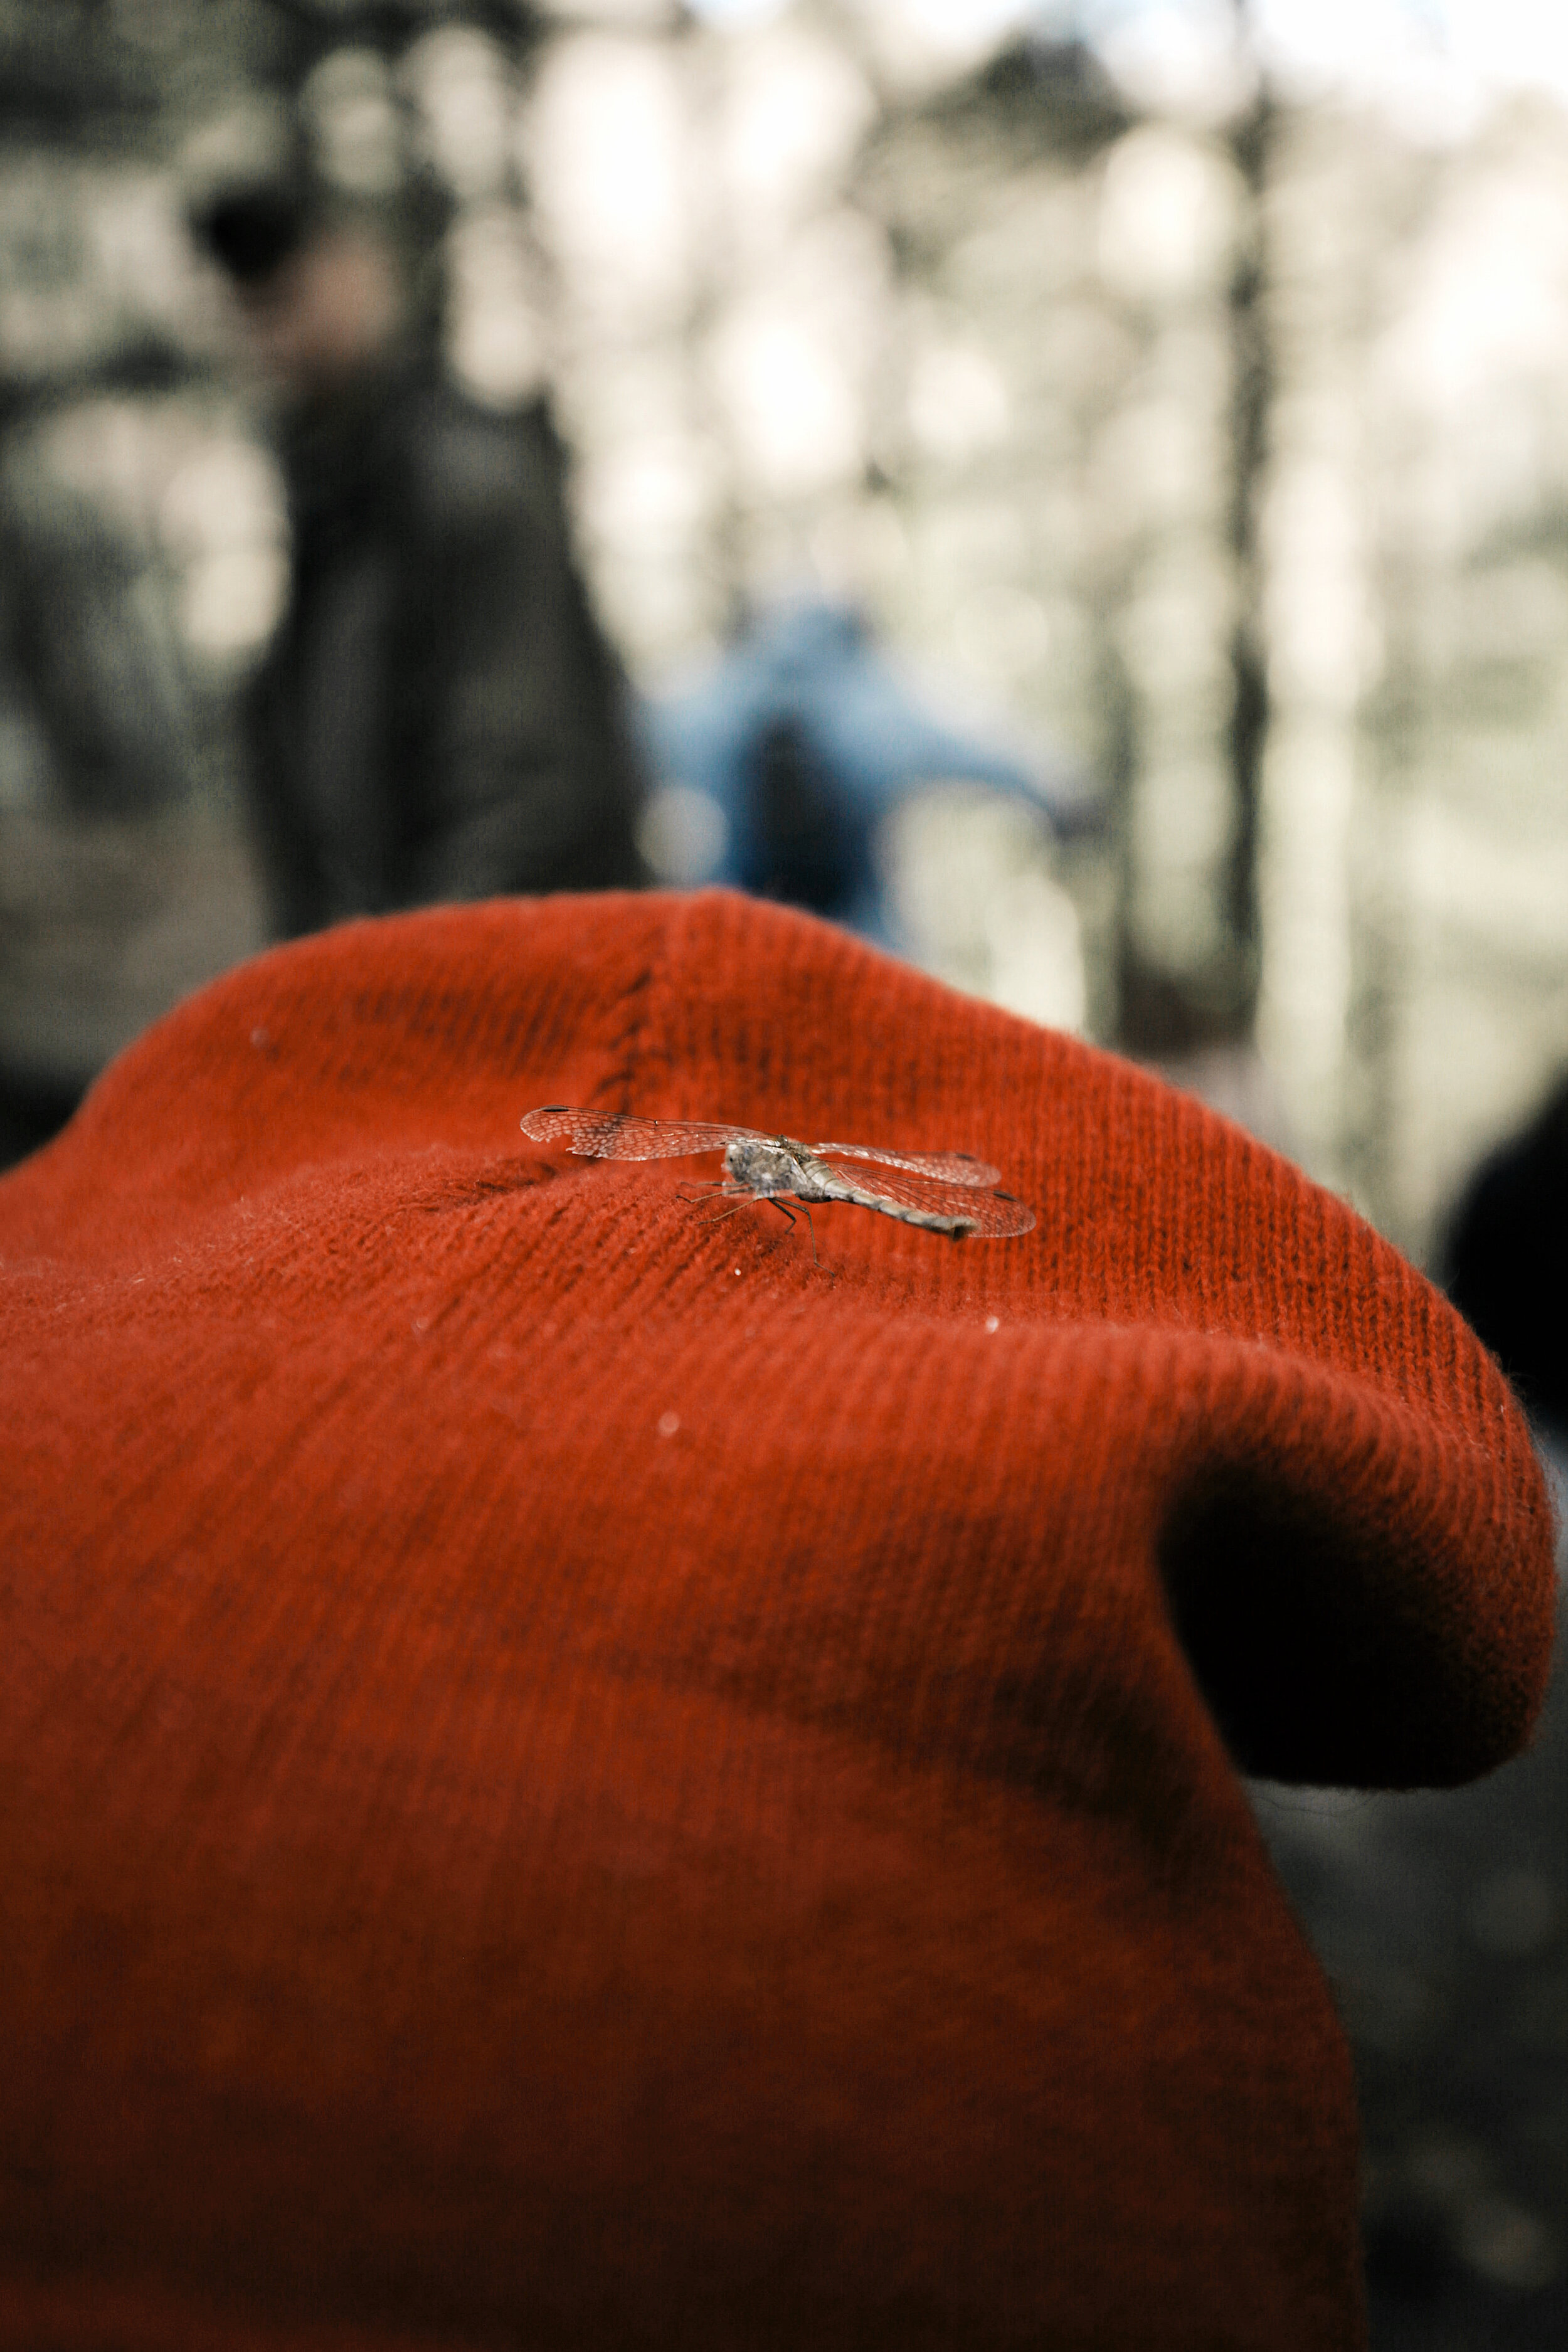  This dragonfly had an injured wing and was able to use my beanie as a resting place. He stayed with me during our hike at Moss Glen Falls, but we placed him on a nice warm shrub before leaving. 